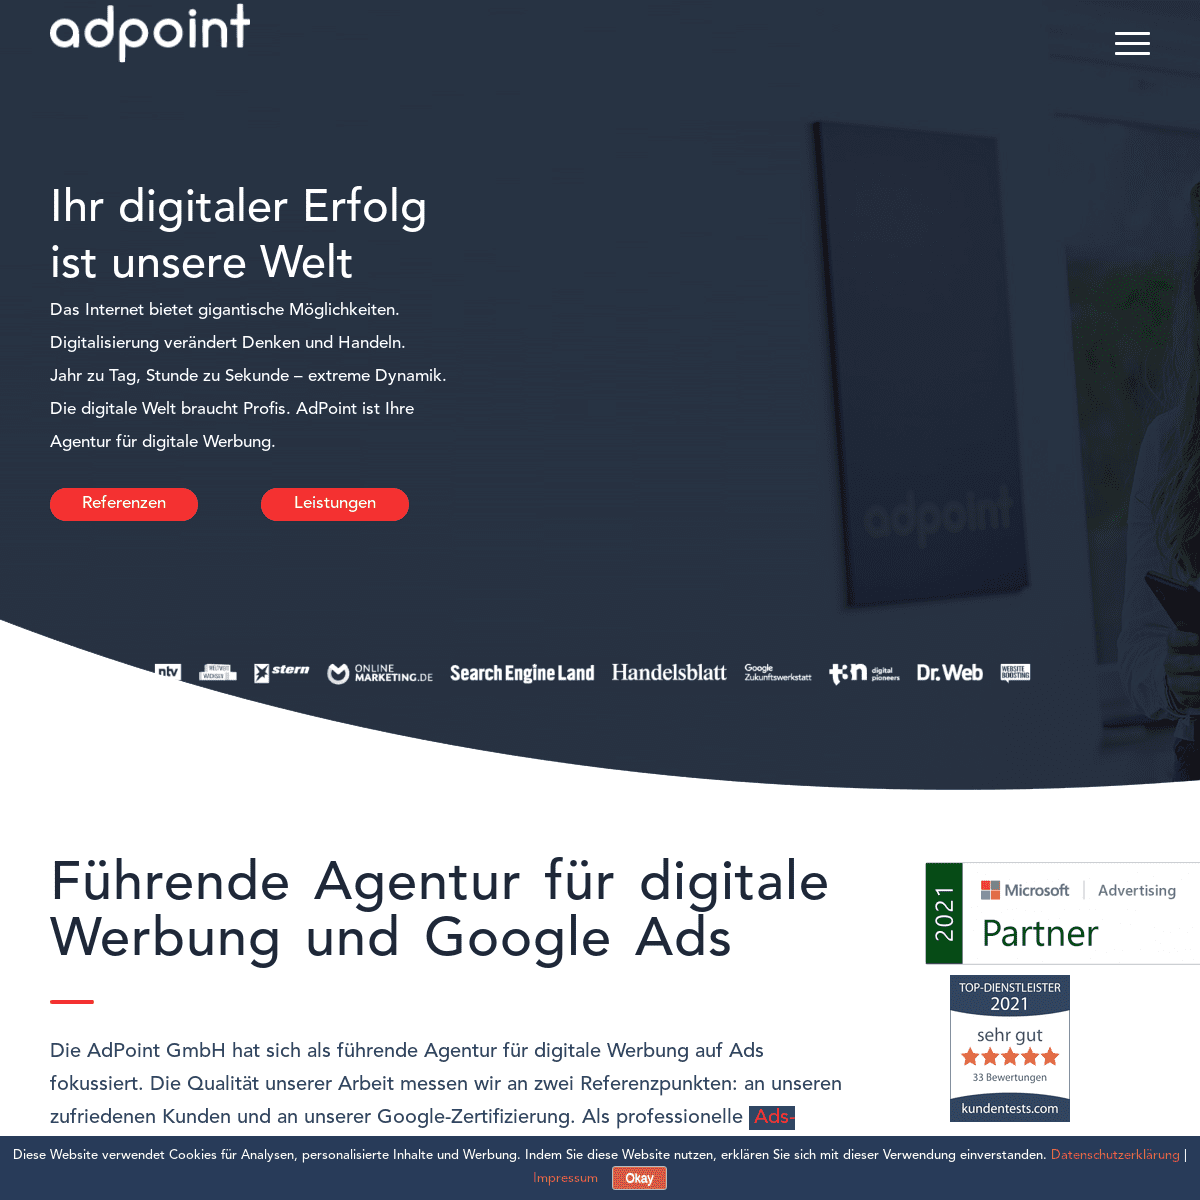 A complete backup of https://adpoint.de